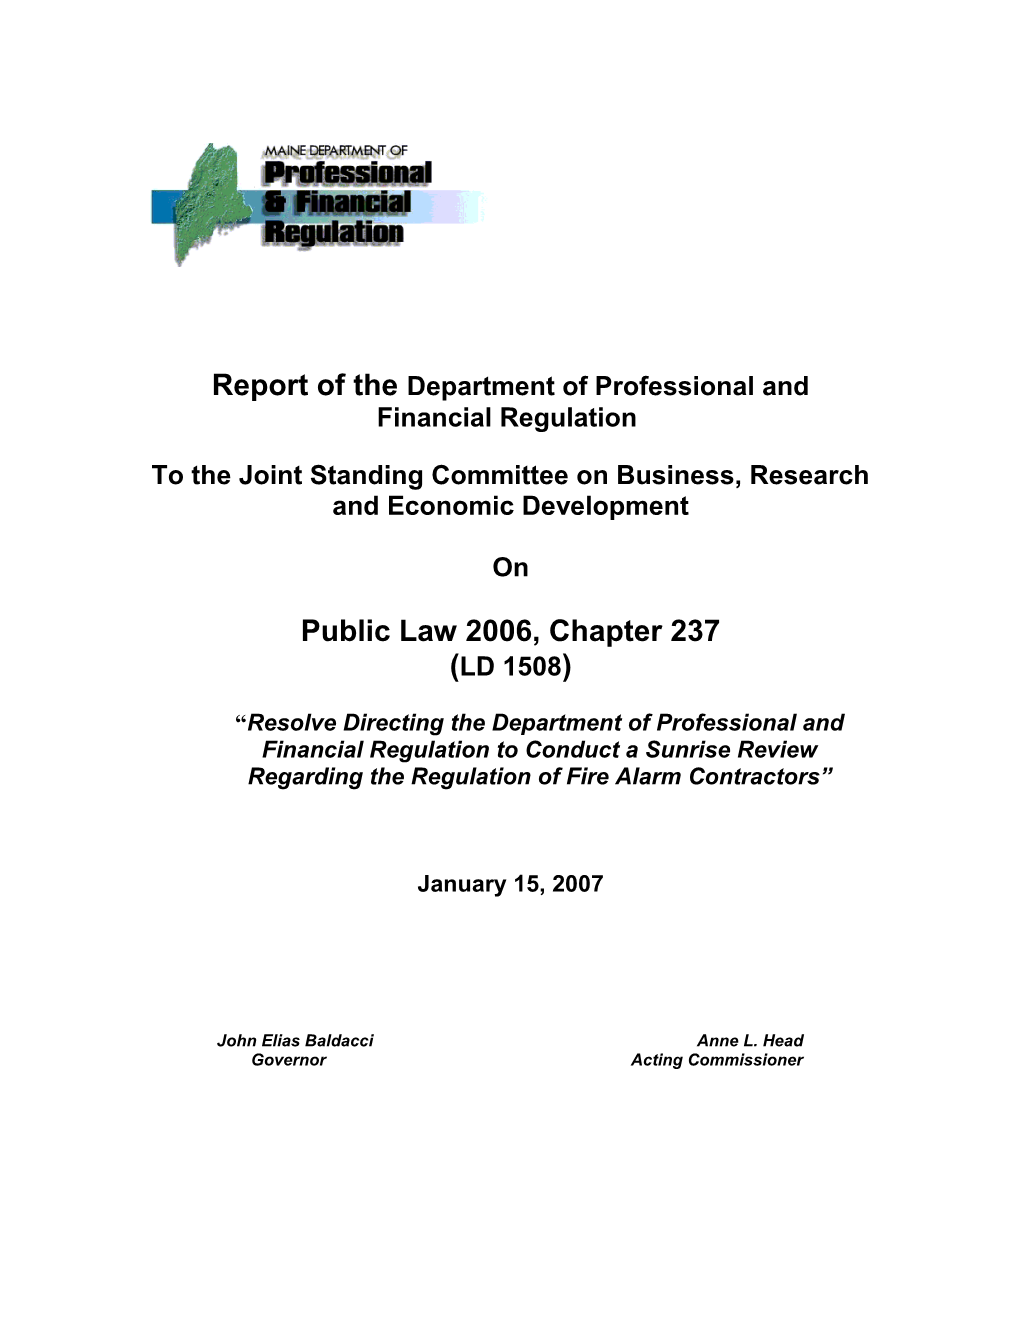 Report of the Department of Professional and Financial Regulation